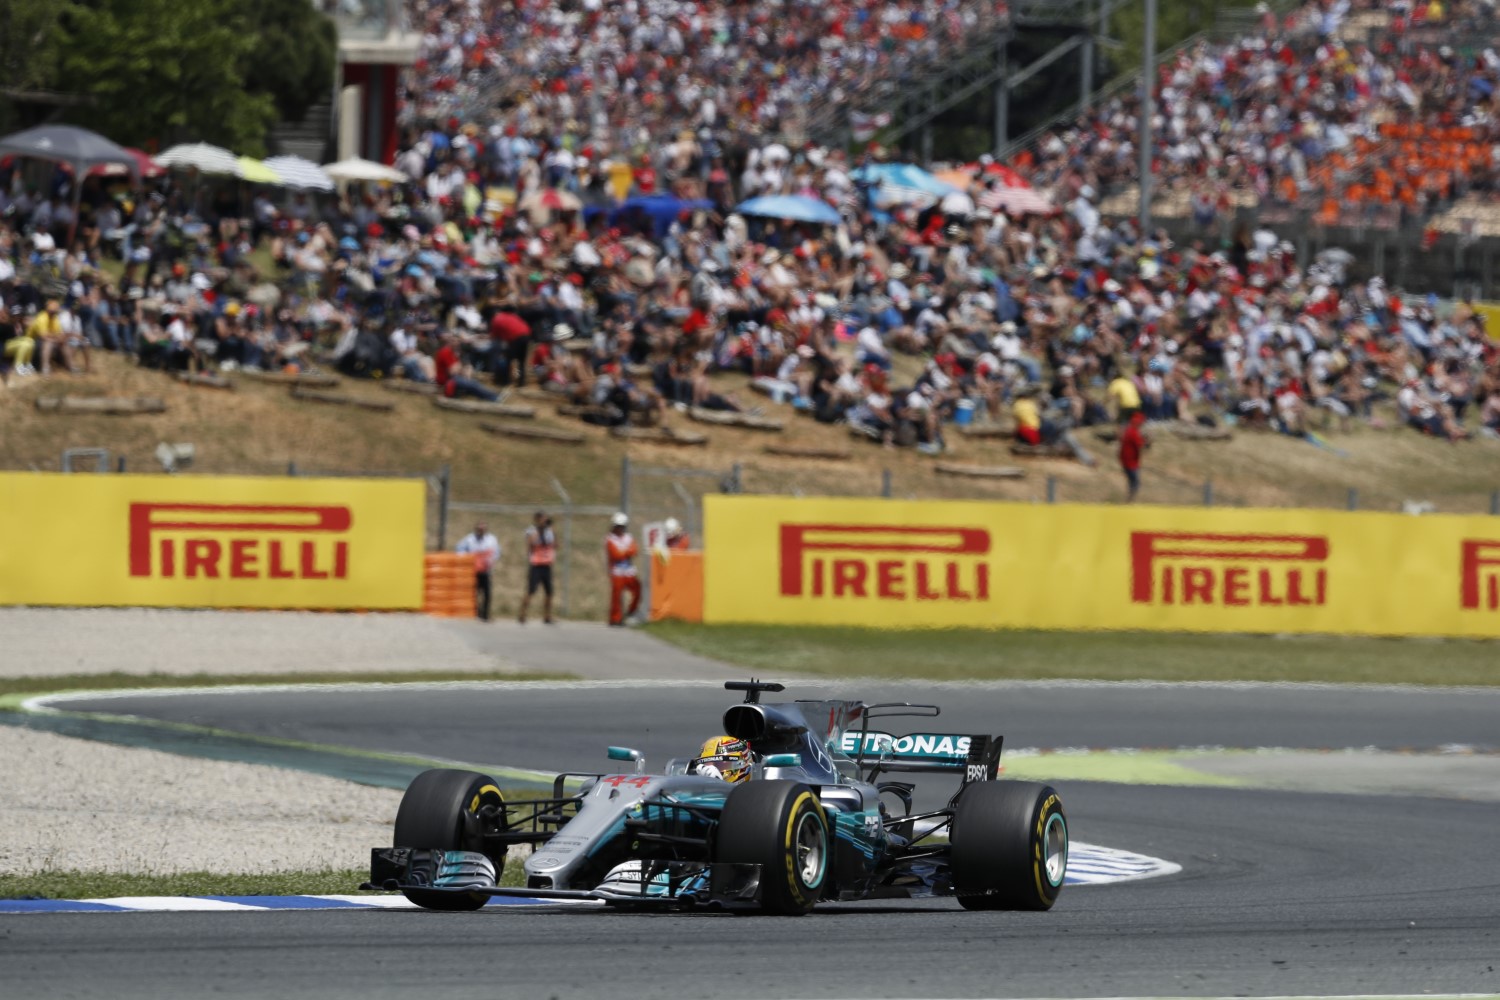 Hamilton was breathing heavily while his rivals sounded ok